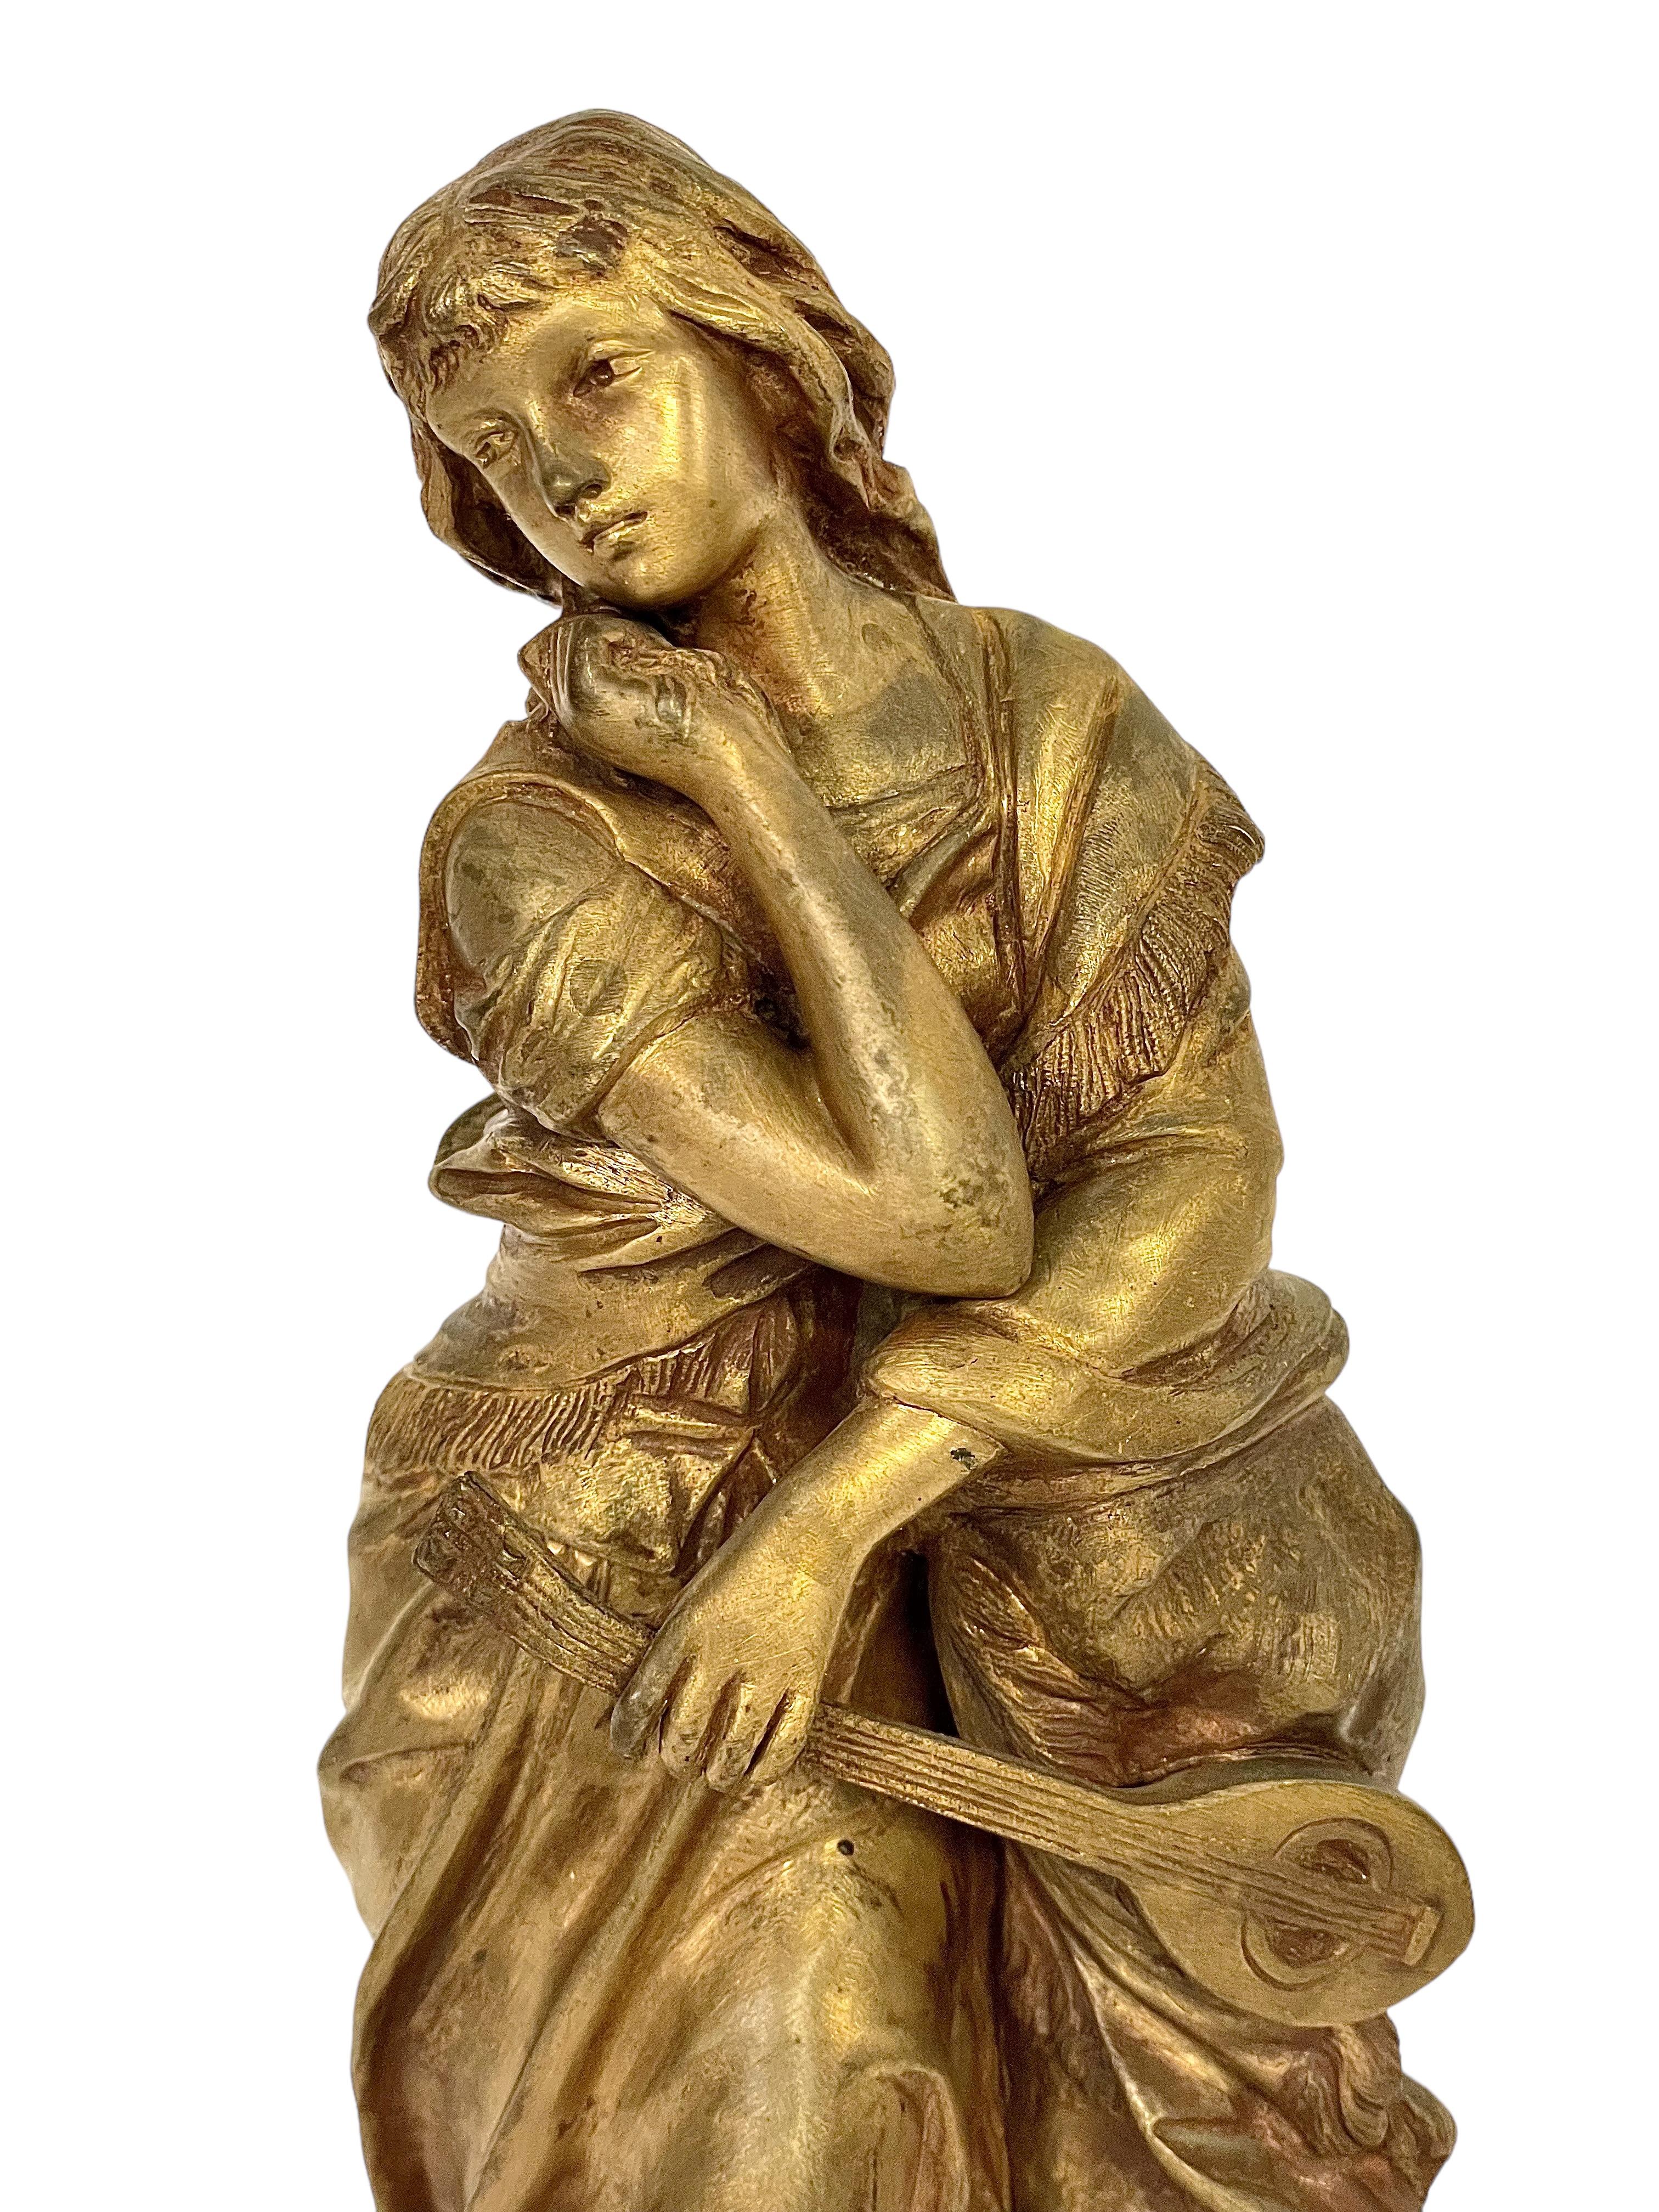 Adrien-Étienne GAUDEZ (1845-1902). “Mignon”. A superb late 19th century patinated bronze statue of a young girl leaning against a tree, holding a lute. The young girl, Mignon, is modelled on a character from the 'opéra comique' of the same name, an